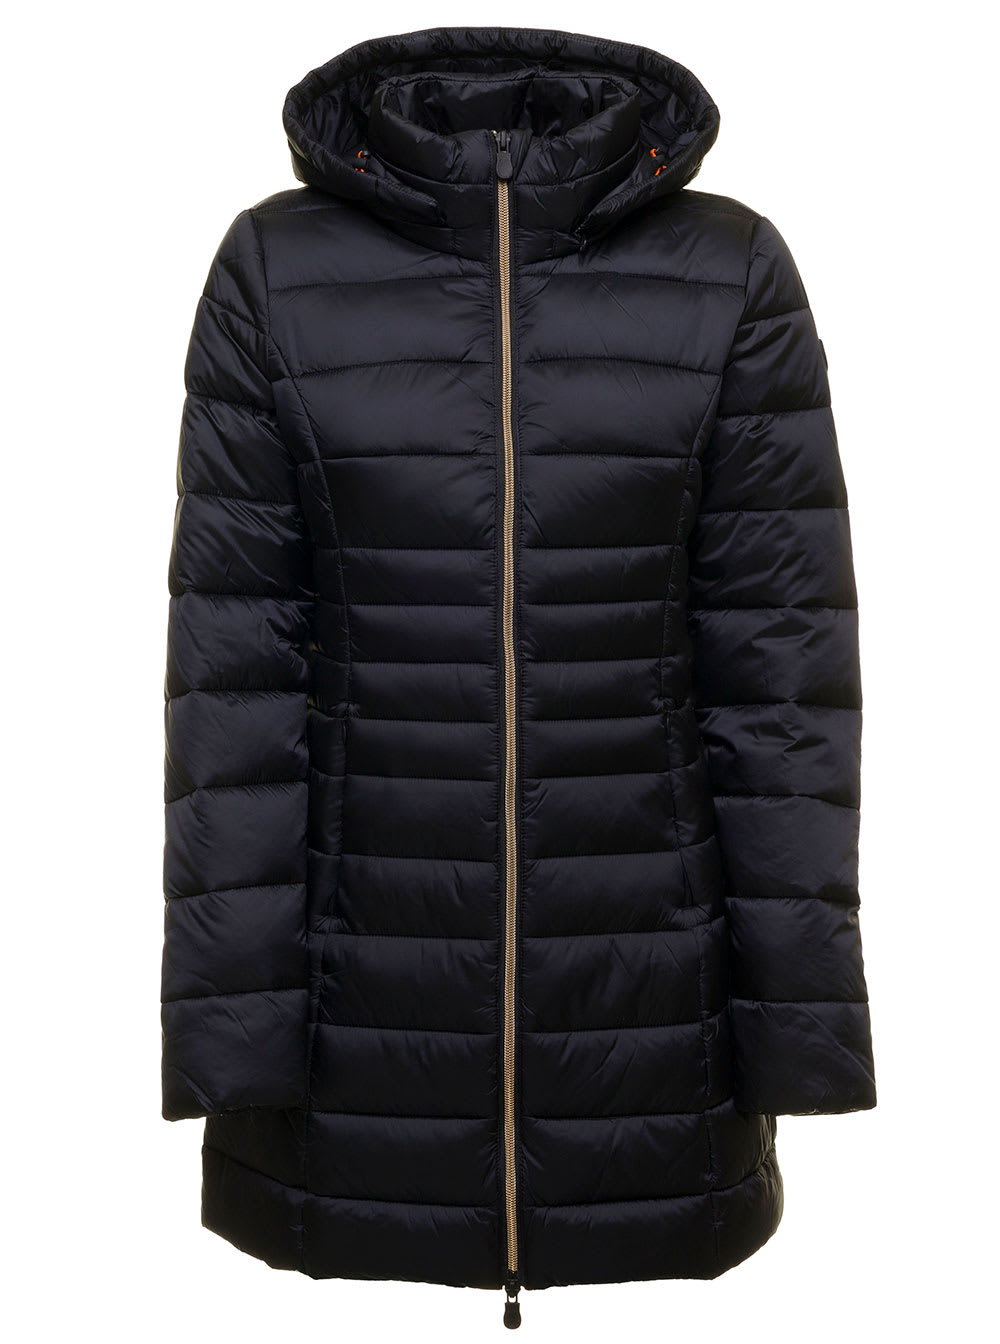 Reese Black Quilted Nylon Long Ecological Down Jacket Save The Duck Woman